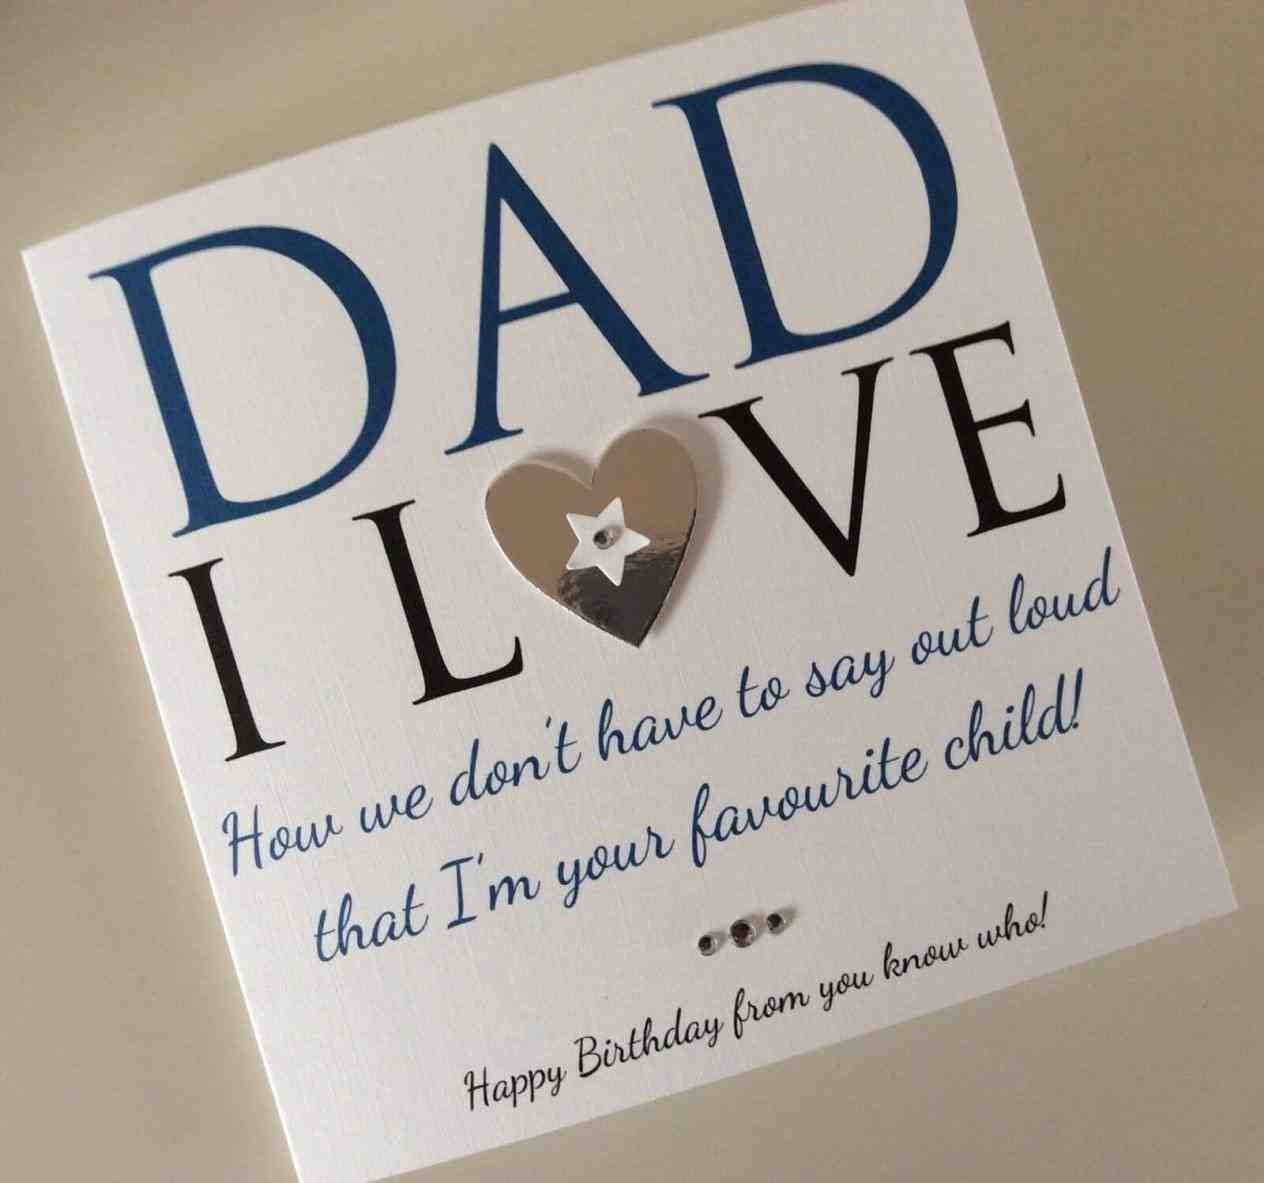 Birthday Gift Ideas For Dad From Son
 the unworking mom homemade birthday card 7hcdqzim family